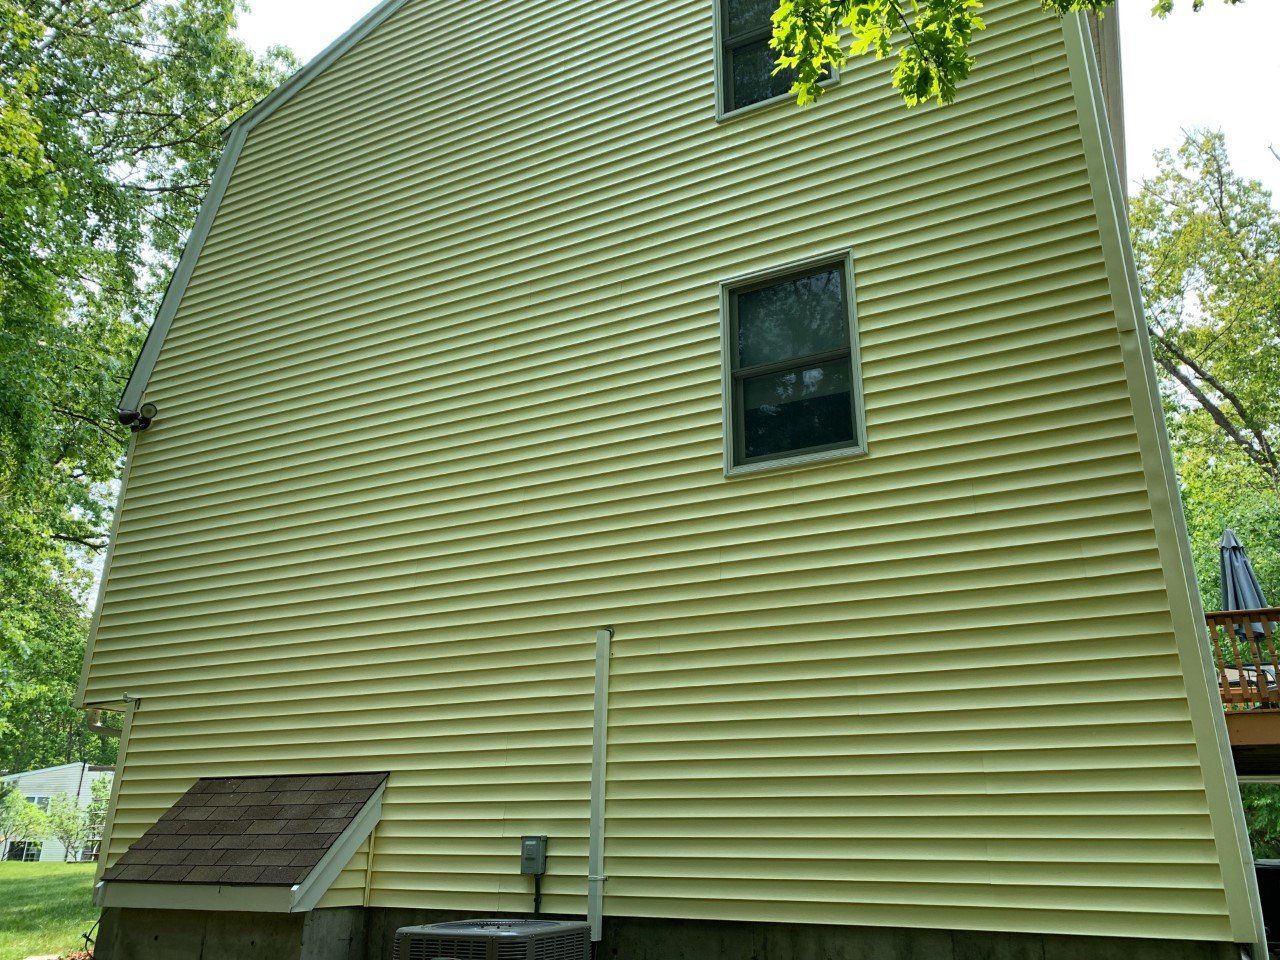 After Residential Siding Wash Results